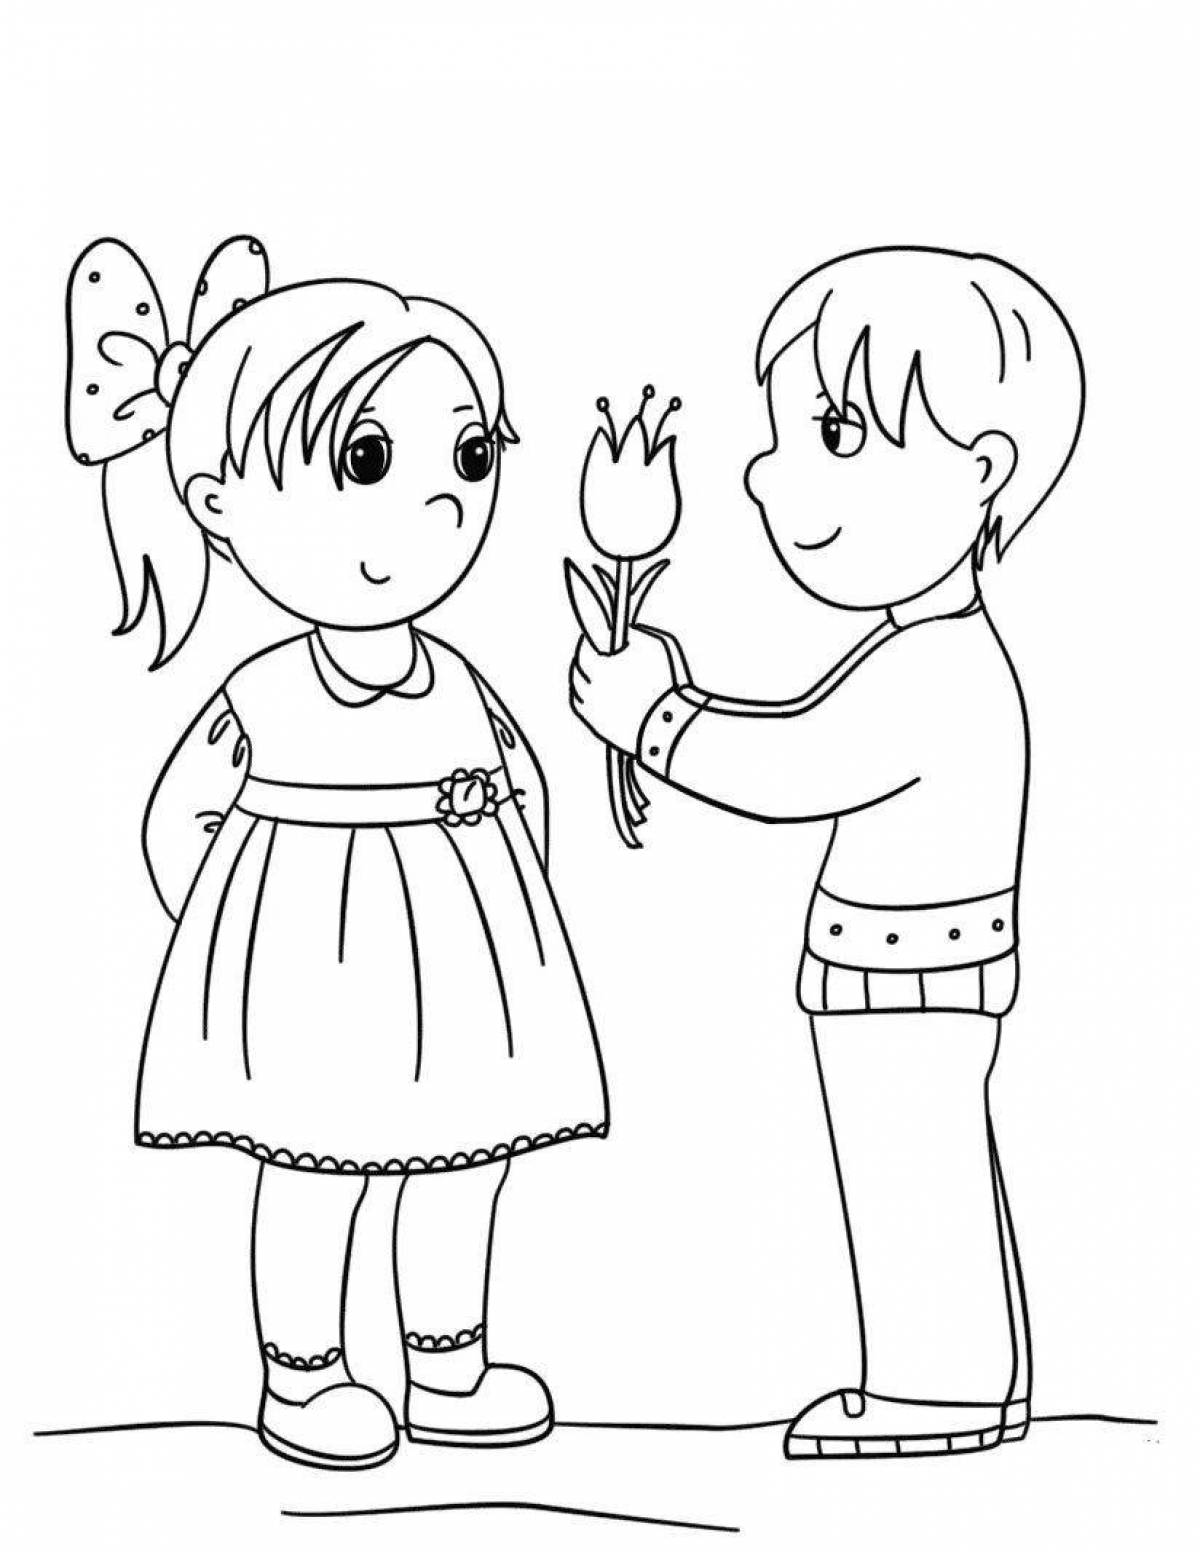 Adorable boy and girl holding hands coloring book